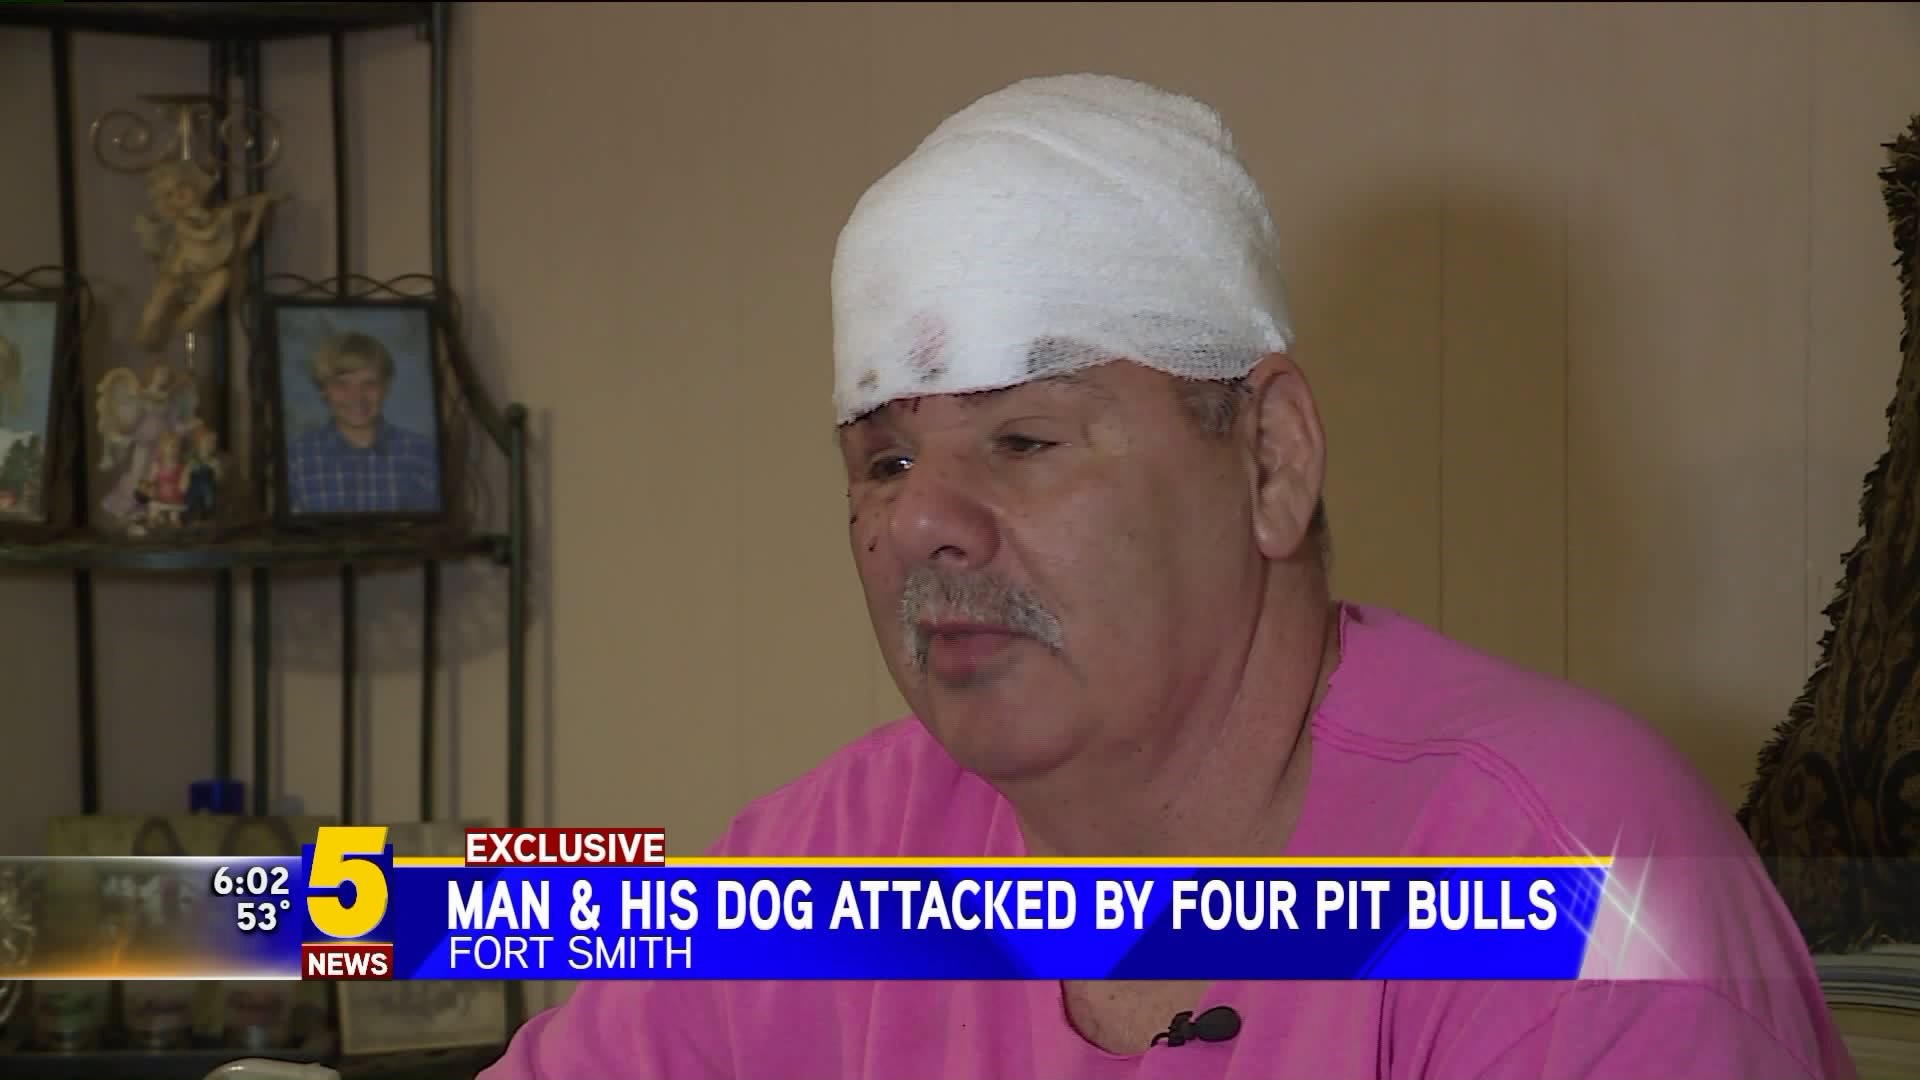 Man & His Dog Attacked By Four Pit Bulls